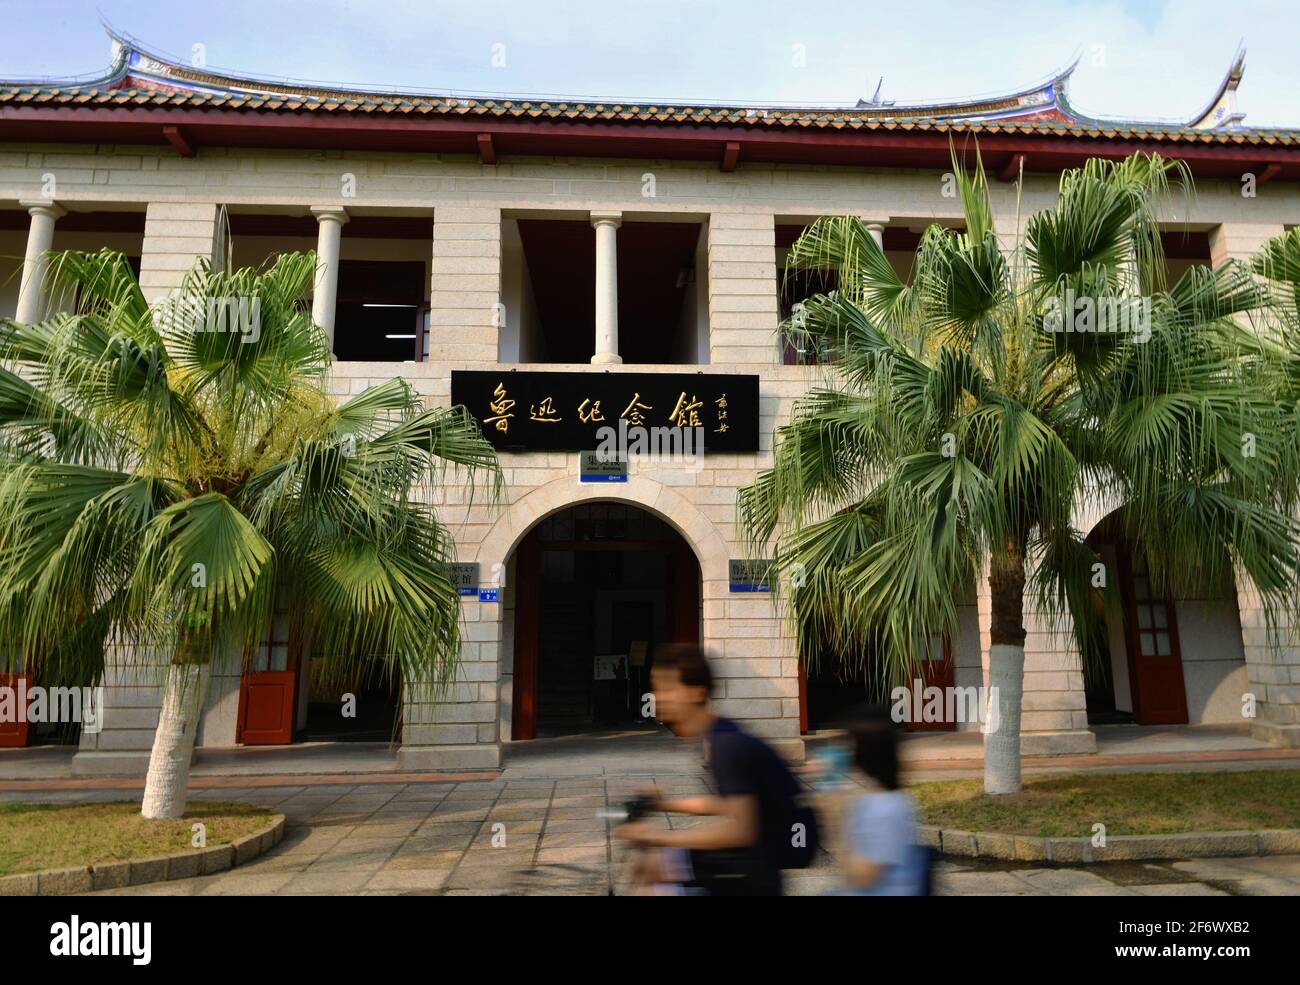 Xiamen. 1st Apr, 2021. Photo taken on April 1, 2021 shows the memorial hall of Lu Xun, one of the most famous contemporary Chinese writers, at the Xiamen University in Xiamen, southeast China's Fujian Province. Xiamen University, based in China's southeastern city of Xiamen, was founded by Tan Kah Kee in 1921, making it the first Chinese university founded by an overseas Chinese national. This year, Xiamen University greets its 100th birthday anniversary. Credit: Wei Peiquan/Xinhua/Alamy Live News Stock Photo